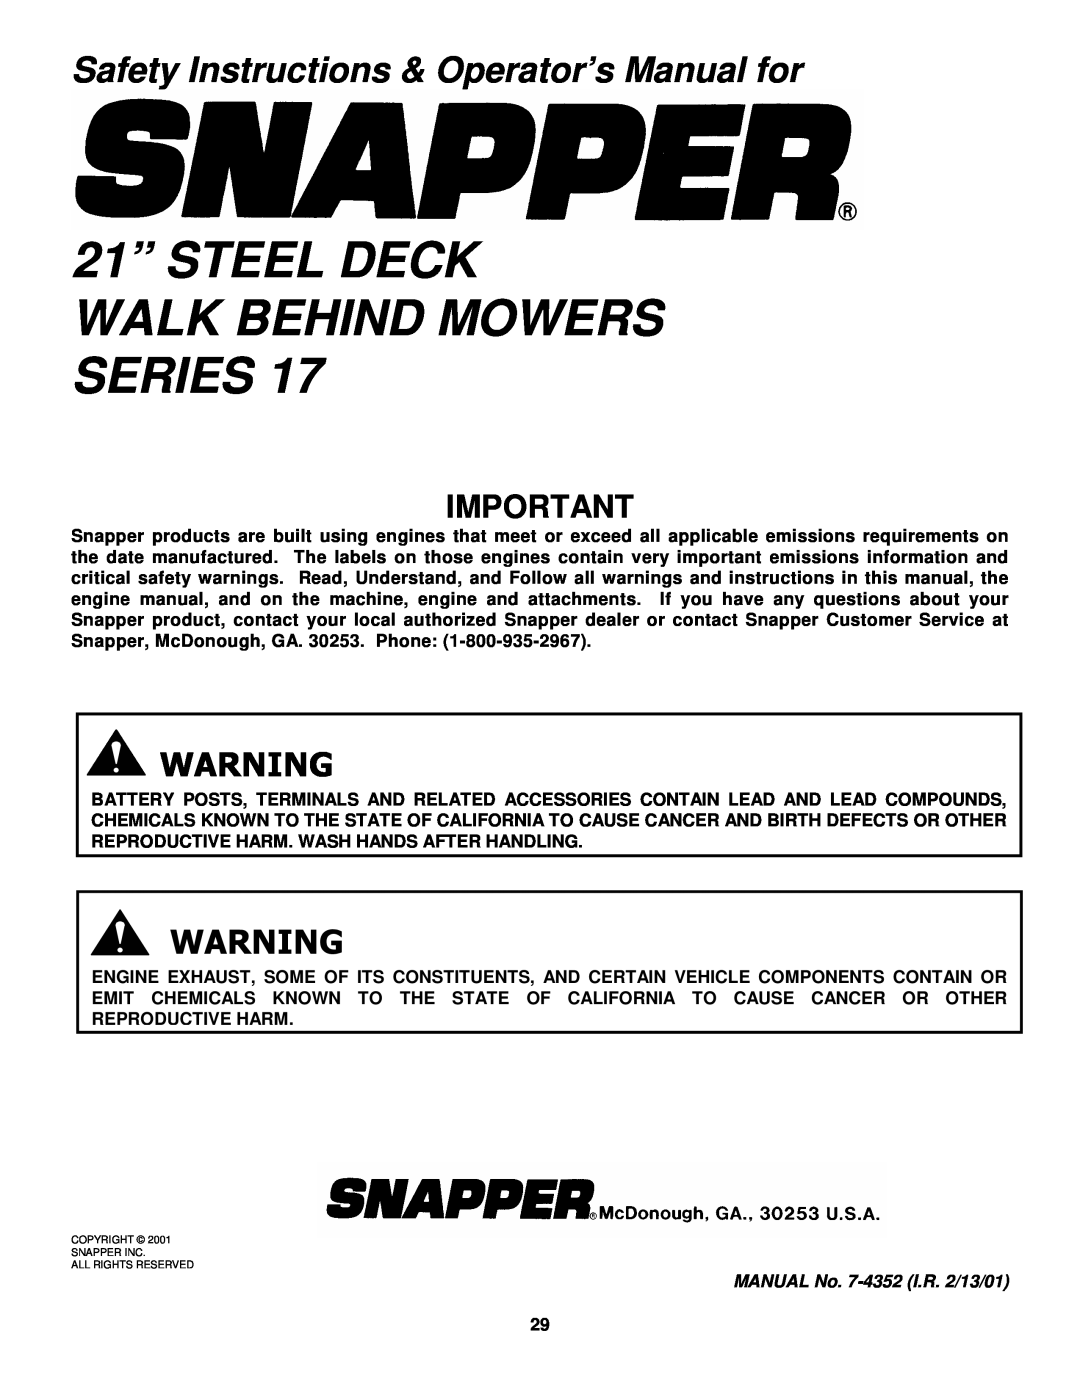 Snapper FRP2167517BV 21” STEEL DECK WALK BEHIND MOWERS SERIES, Safety Instructions & Operator’s Manual for 